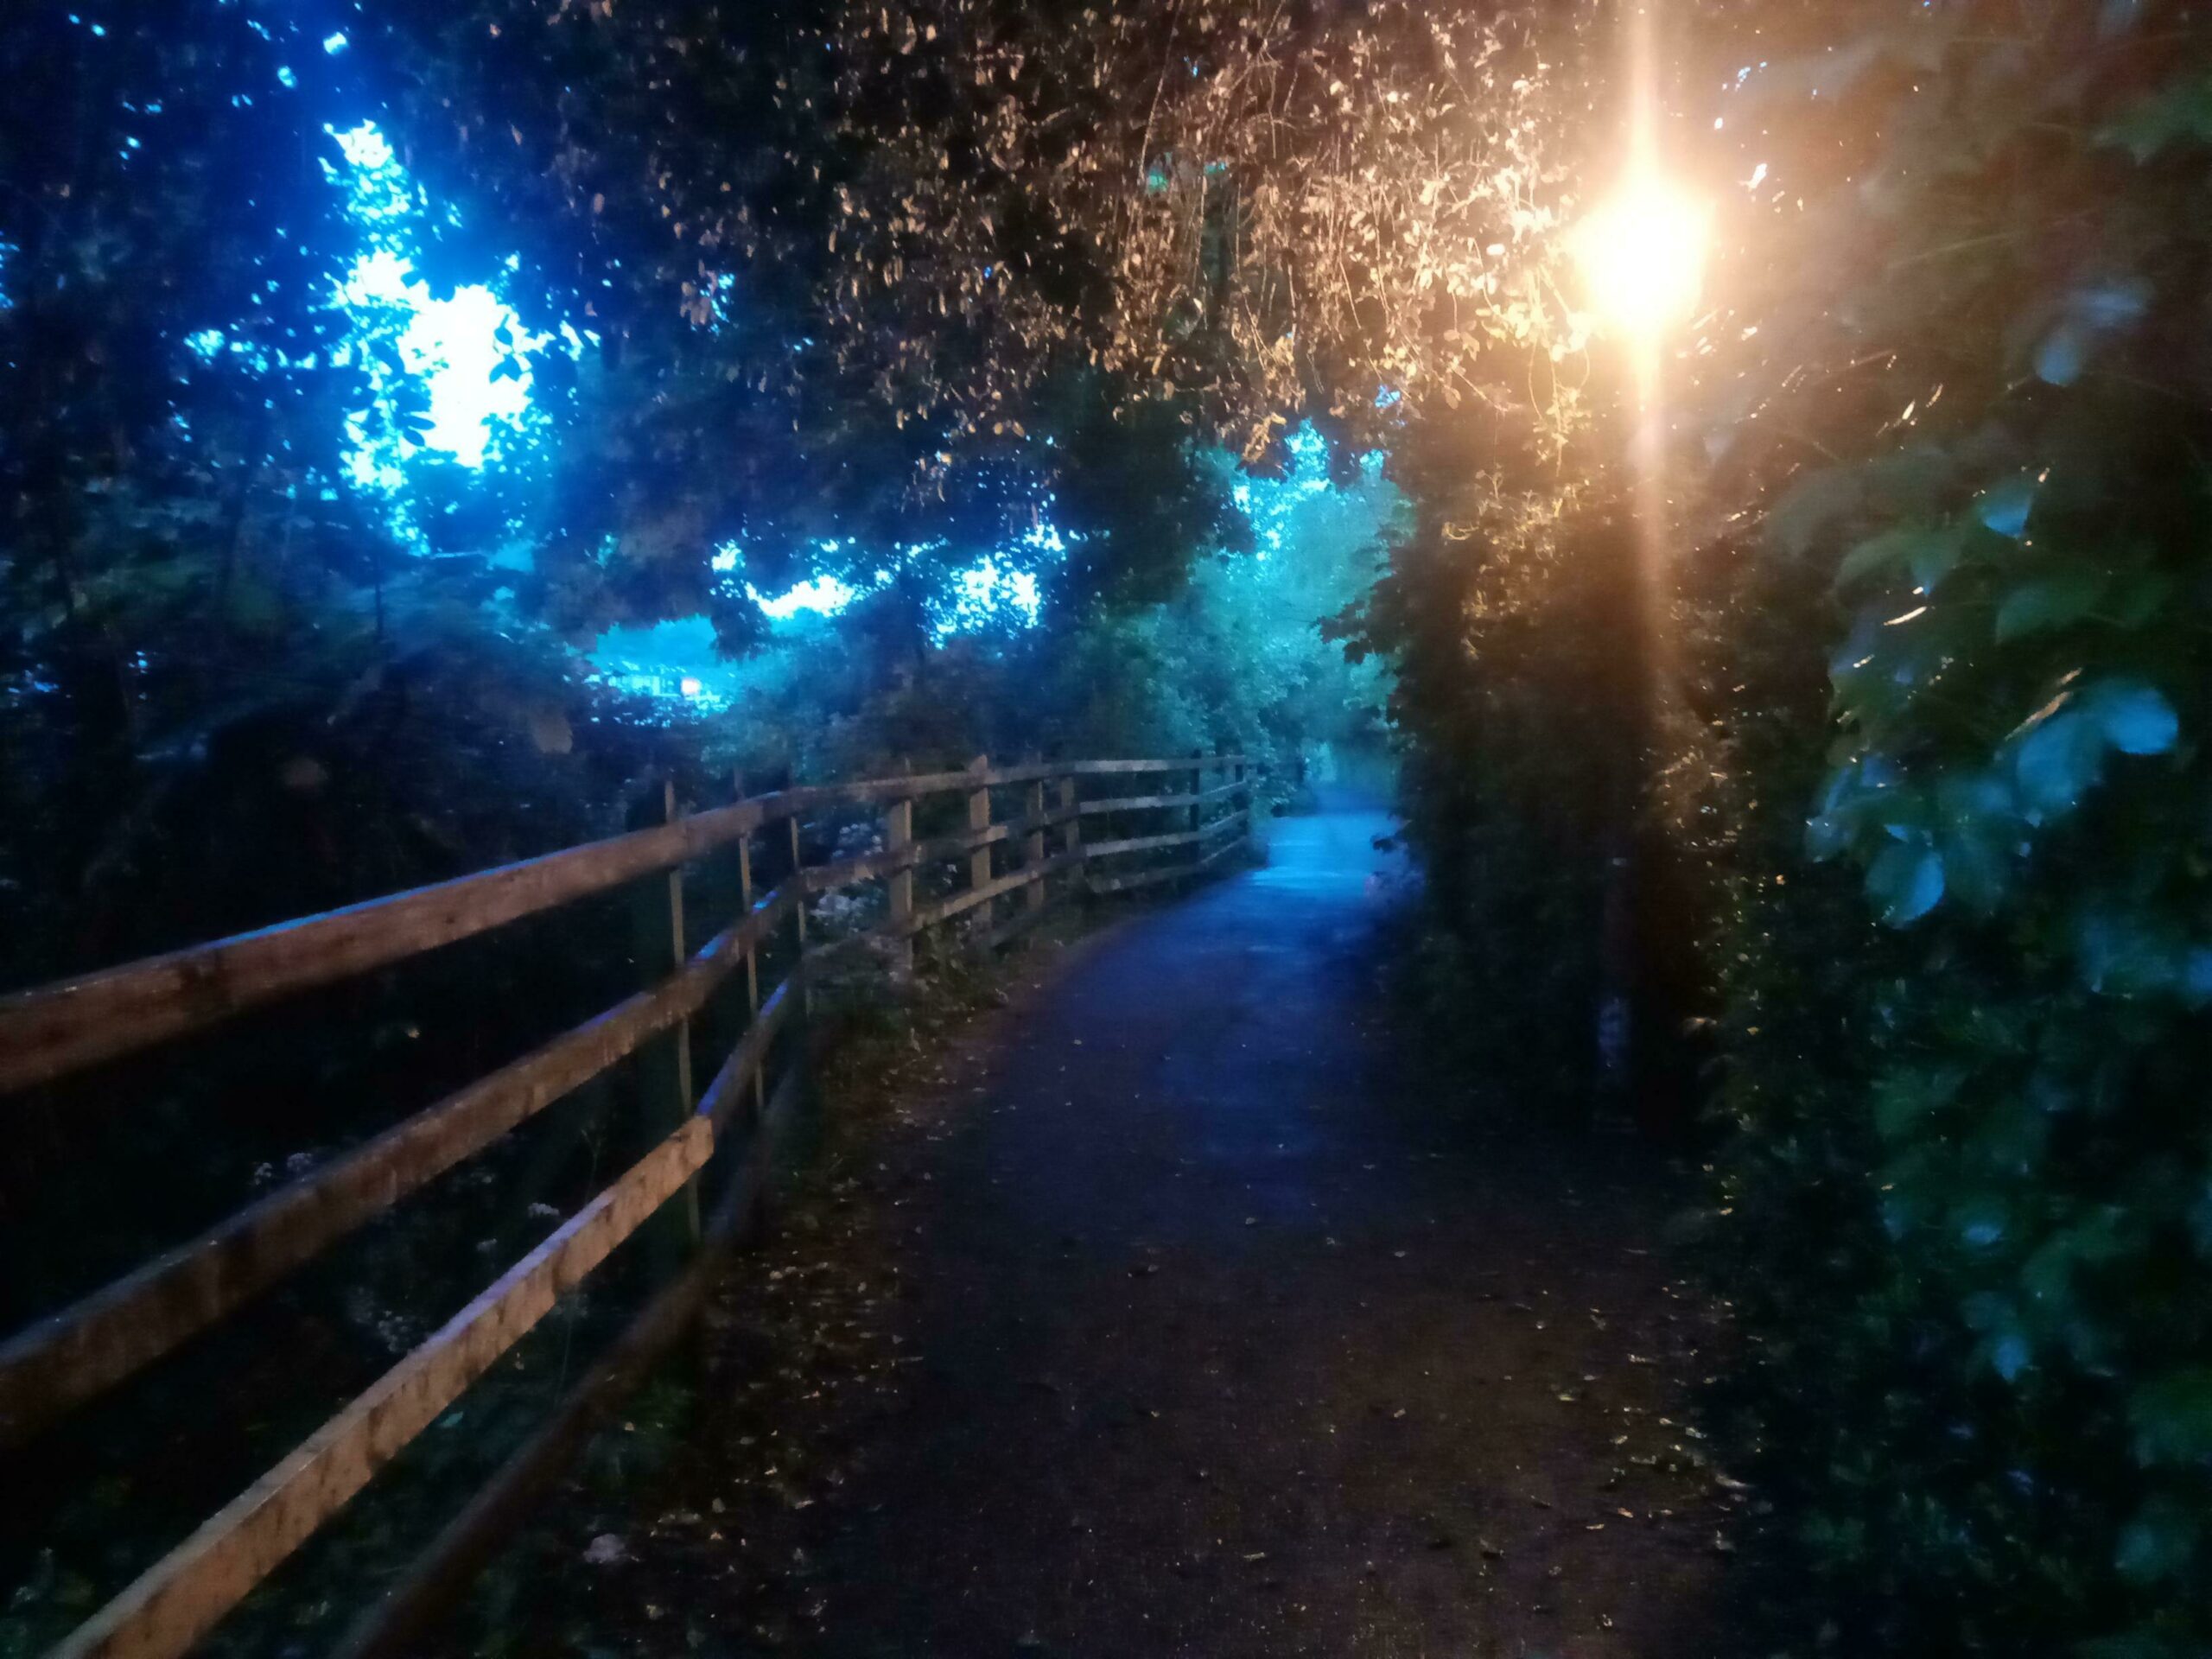 Walk Home In The Rain Looked Weirdly Celestial Today